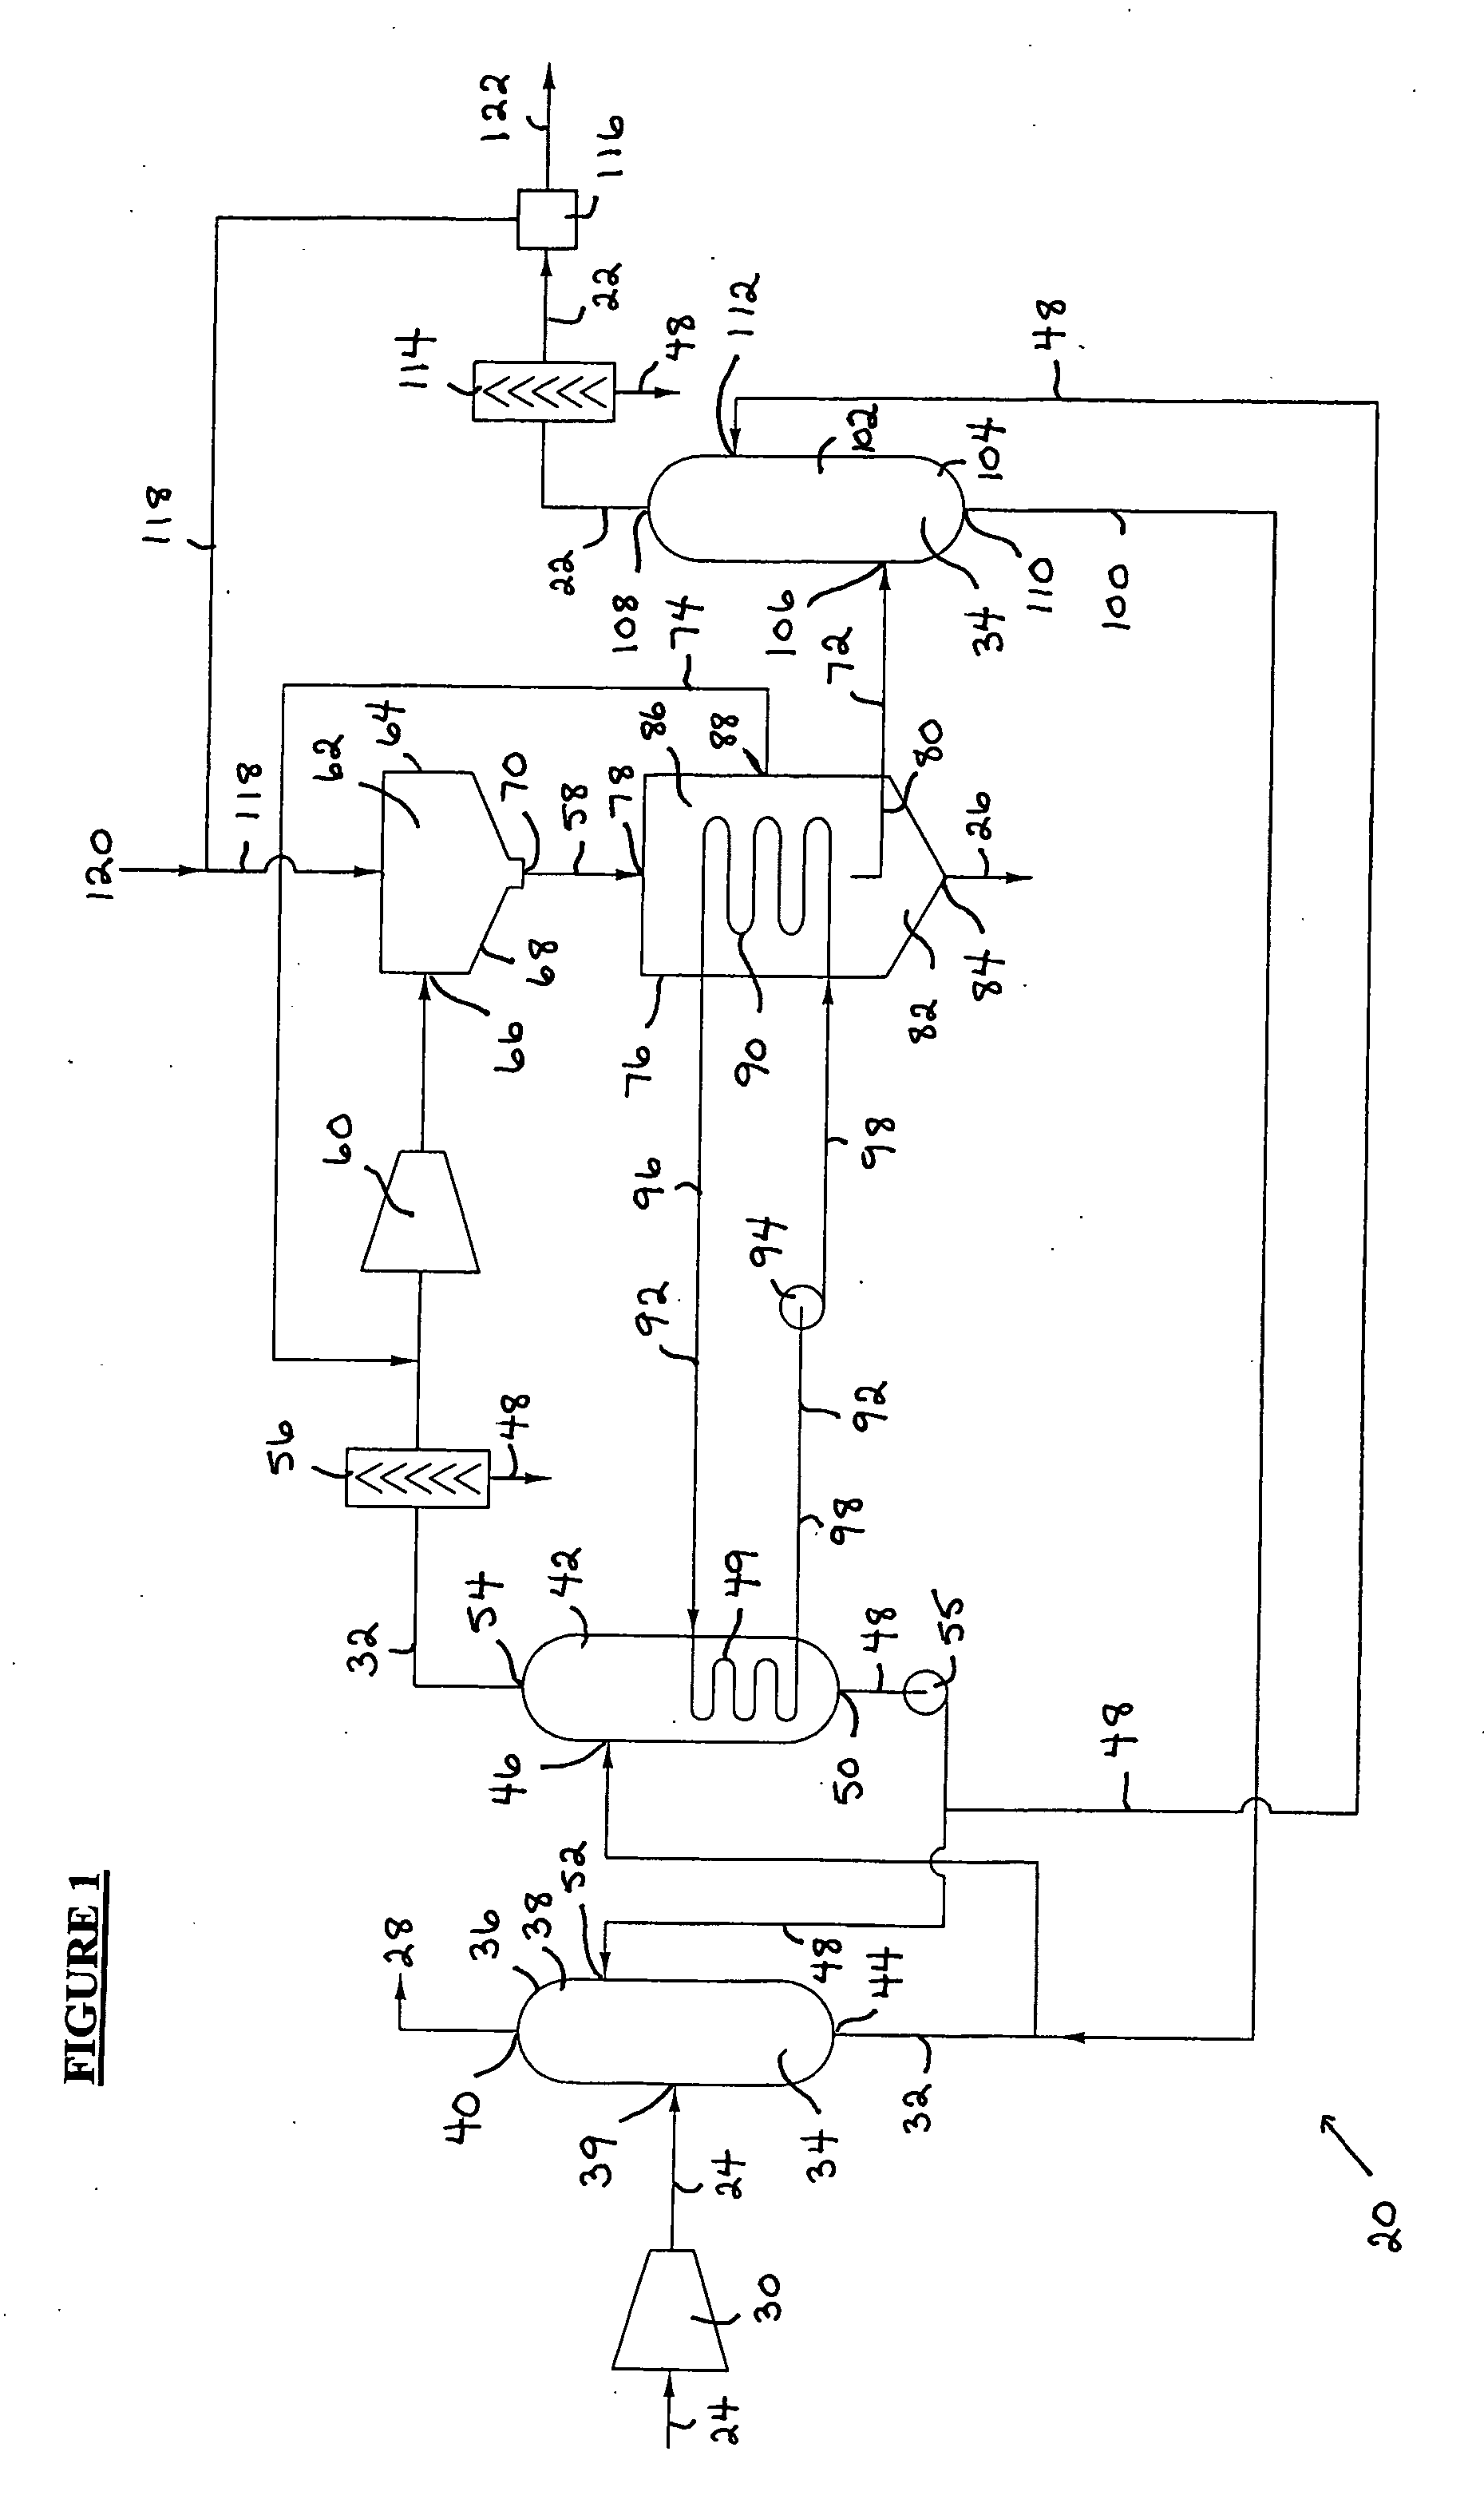 Process and apparatus for converting hydrogen sulfide into hydrogen and sulfur